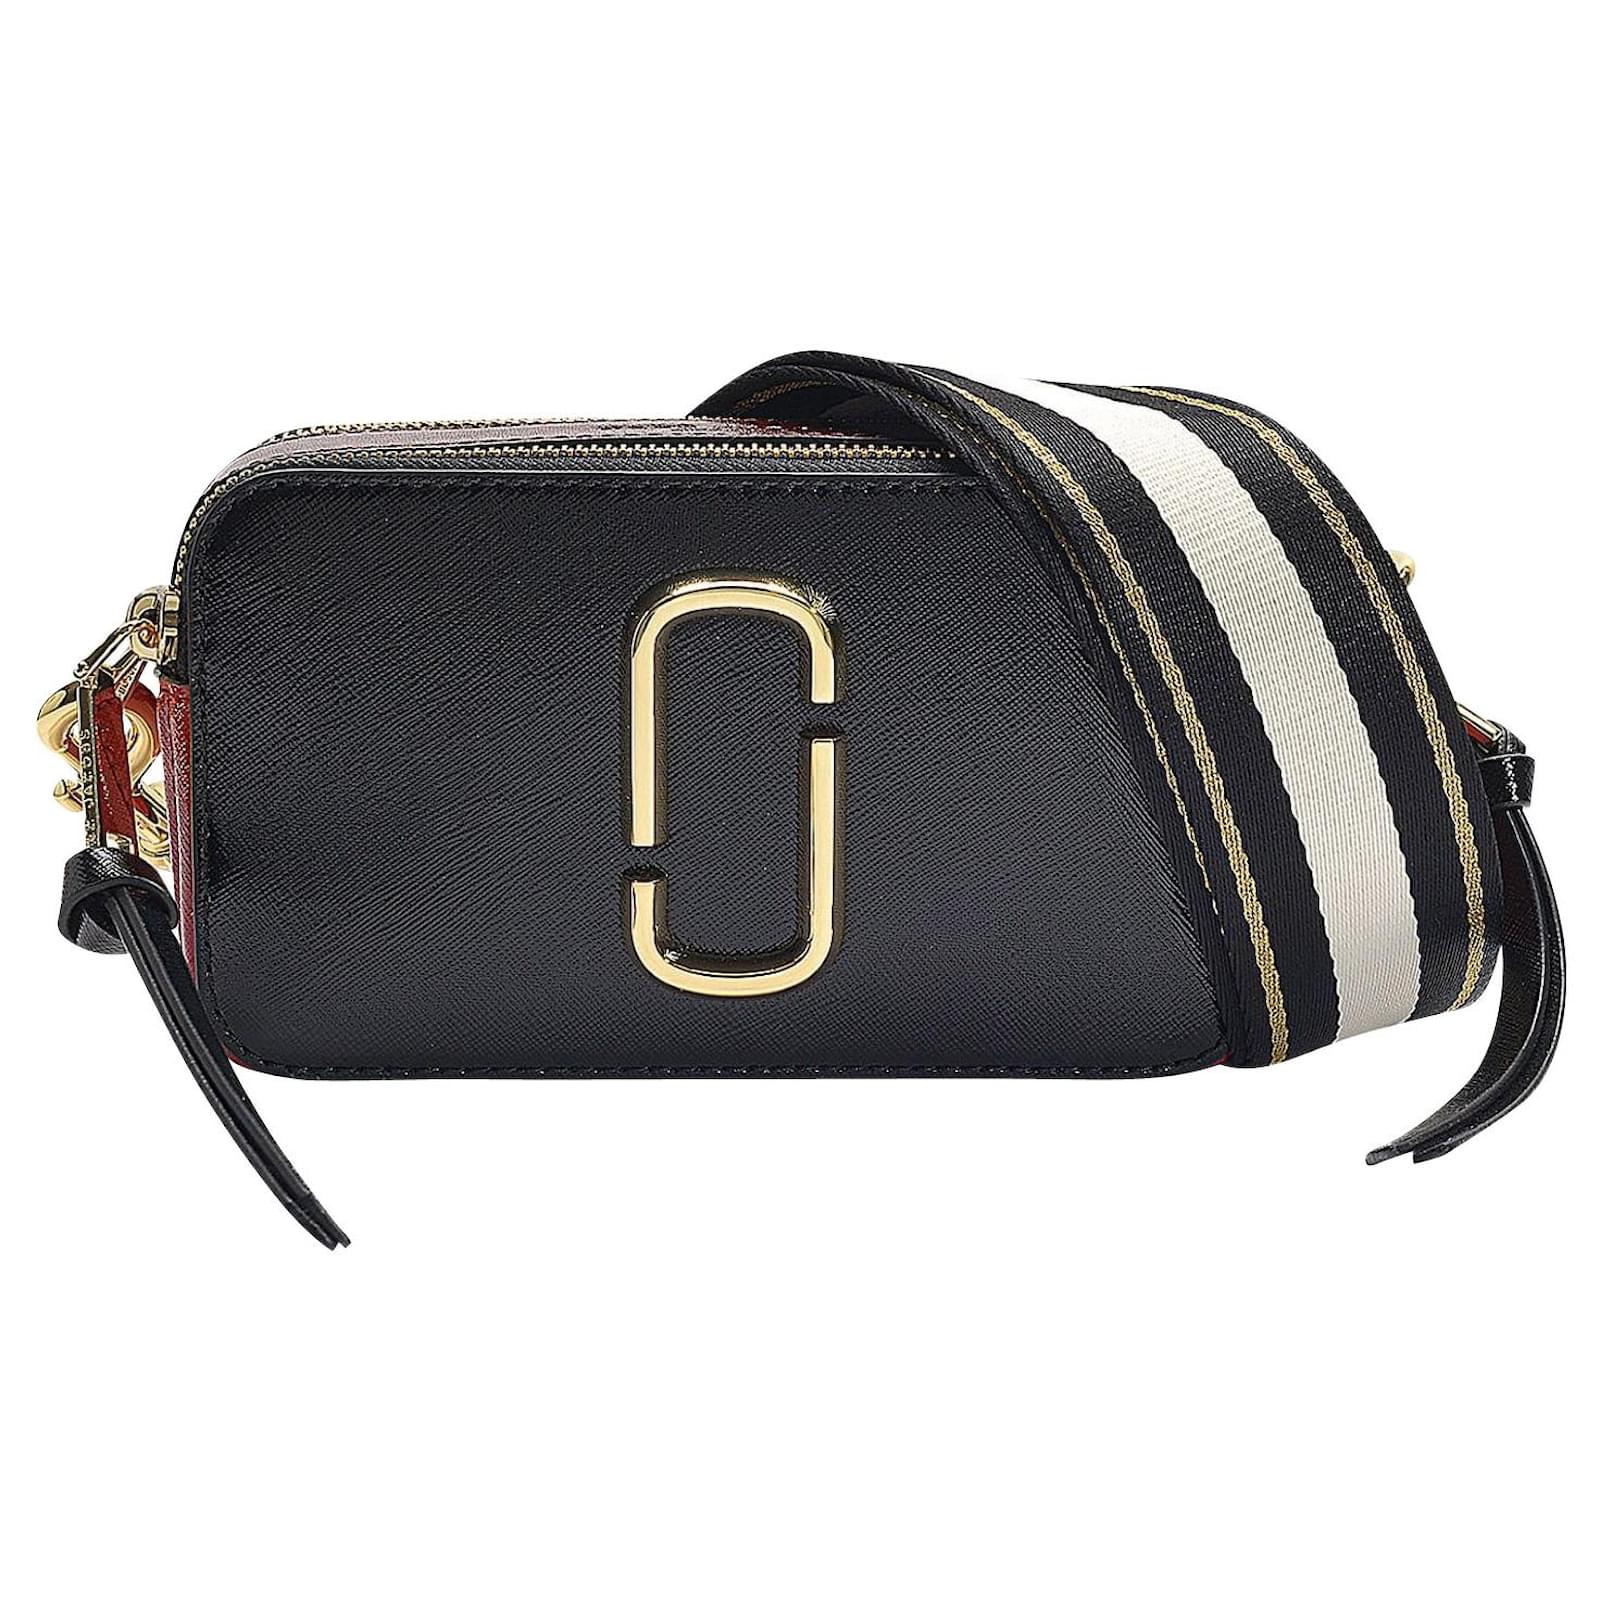 Marc Jacobs, Bags, Marc Jacobs The Snapshot Bag In New Black Multi Color